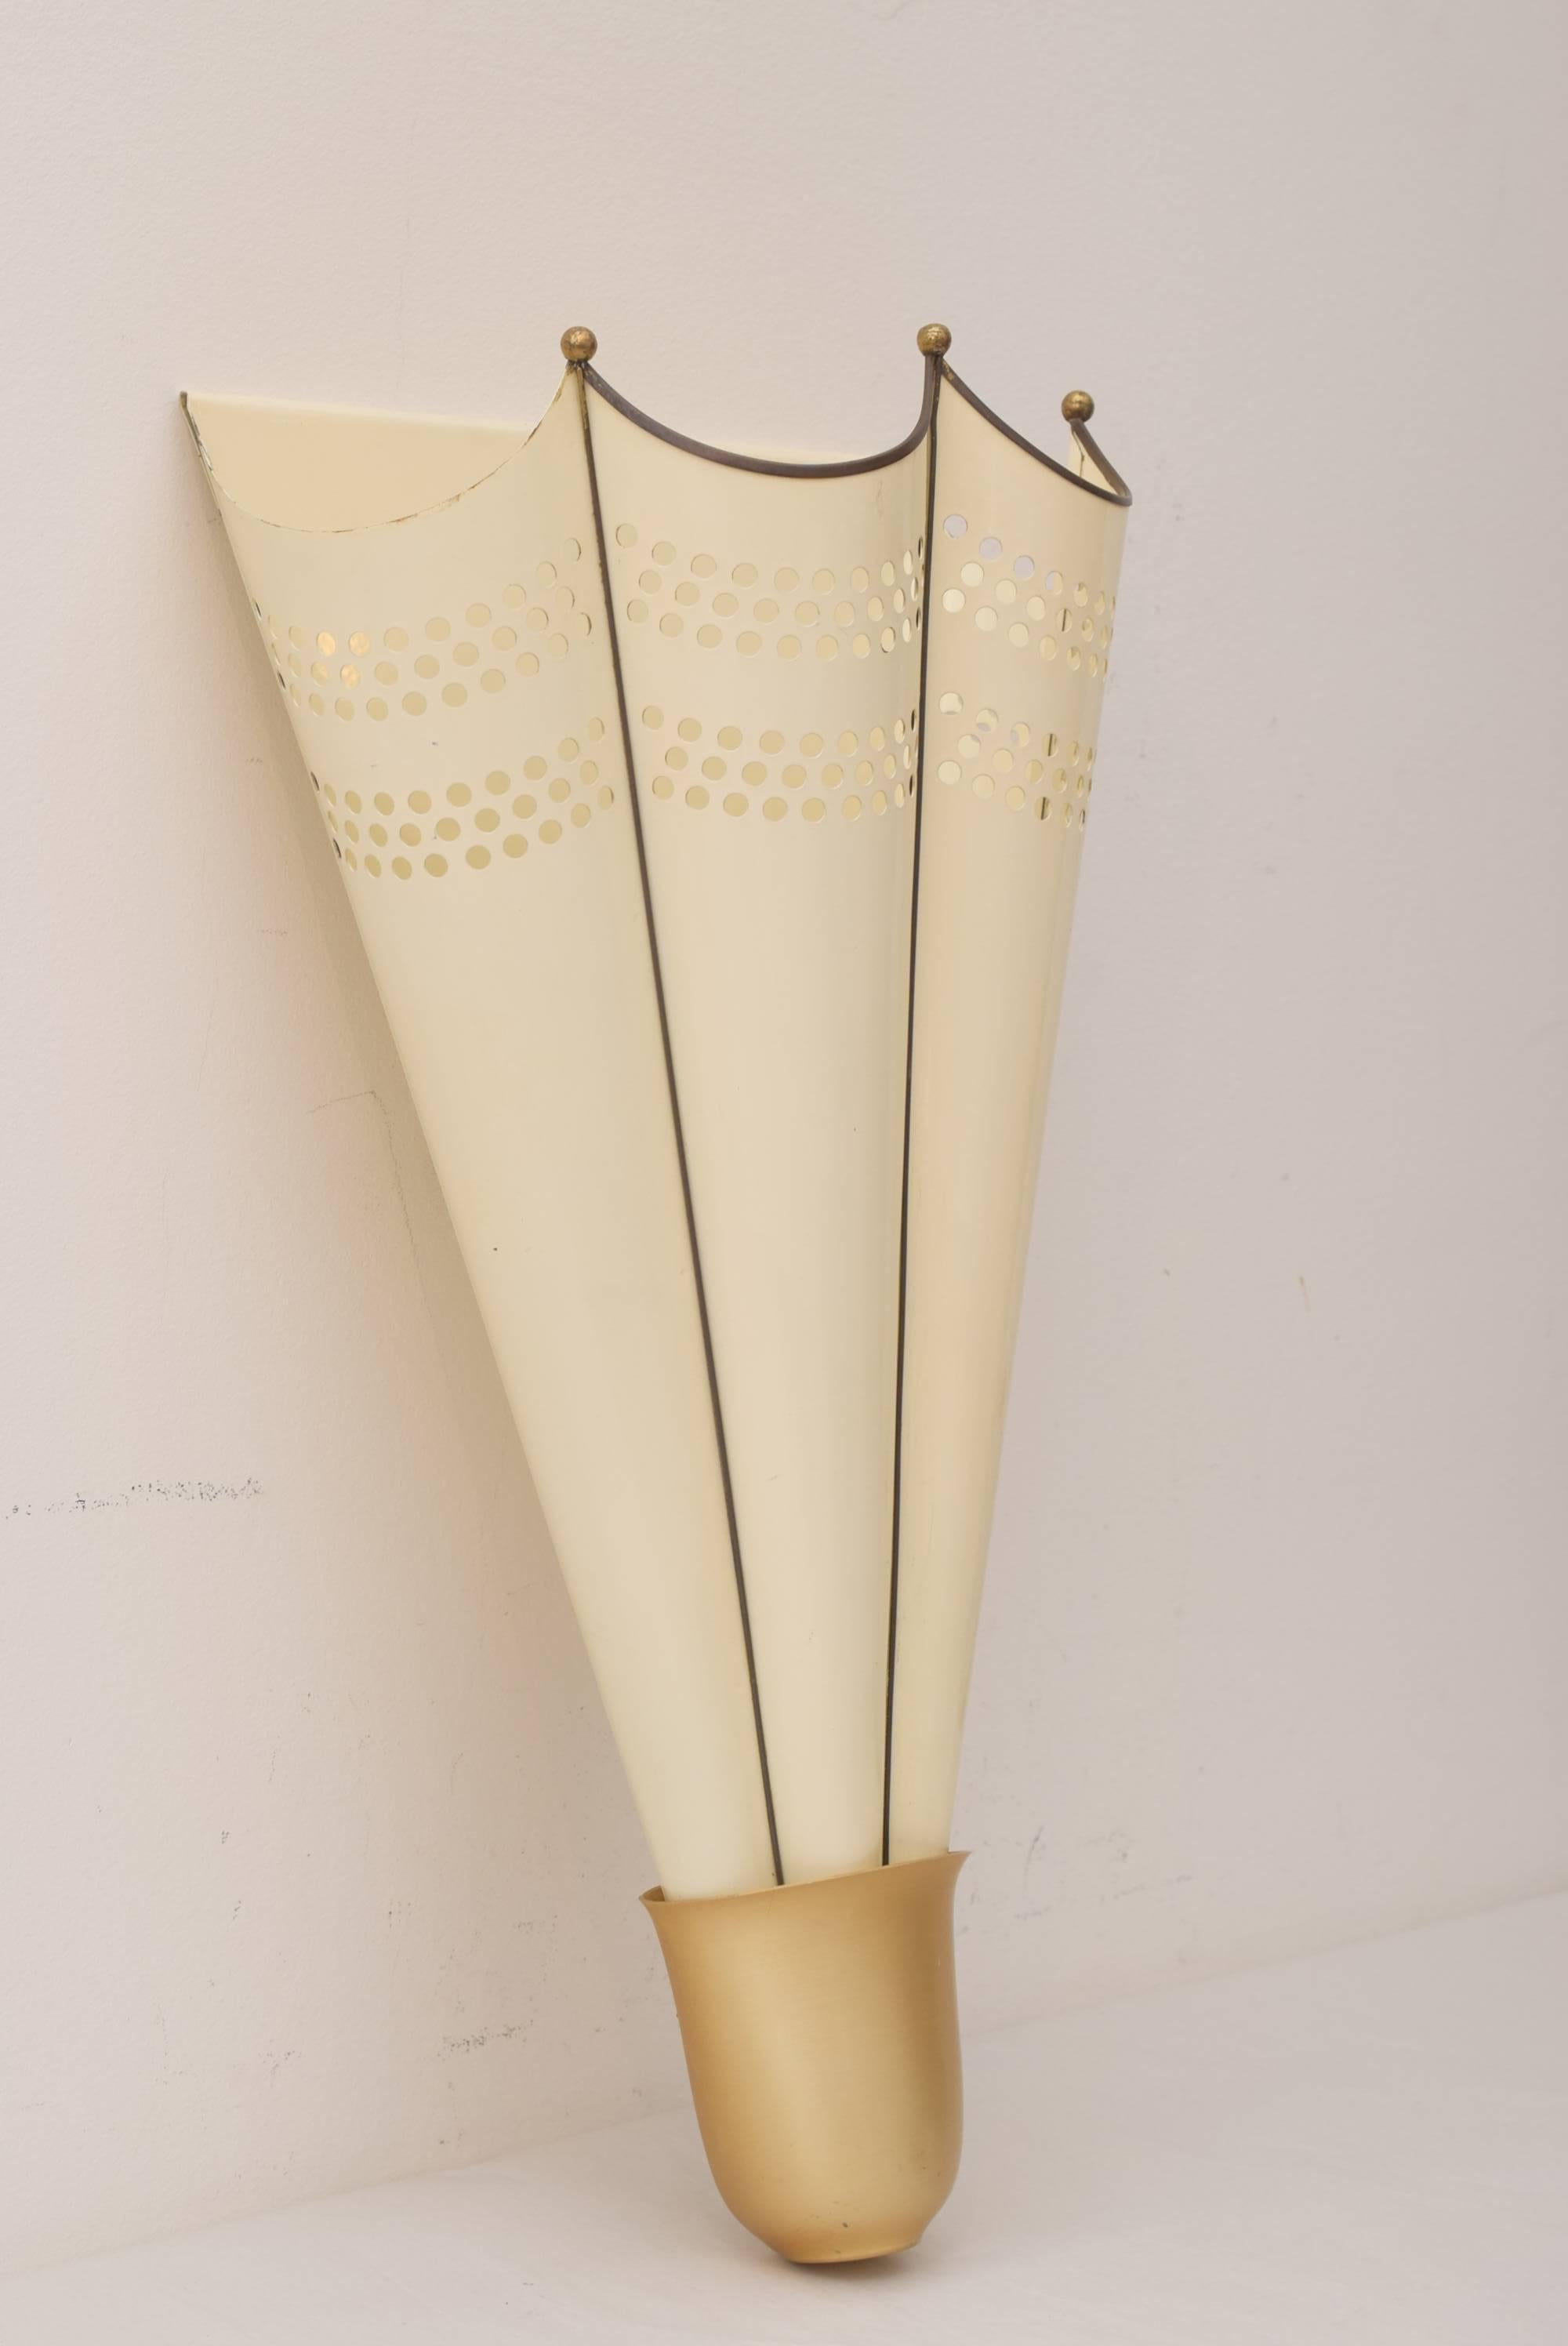 Umbrella holder is in the shape of an open umbrella. Its flat back allows it to hang on a wall, circa 1950s.
Original condition.